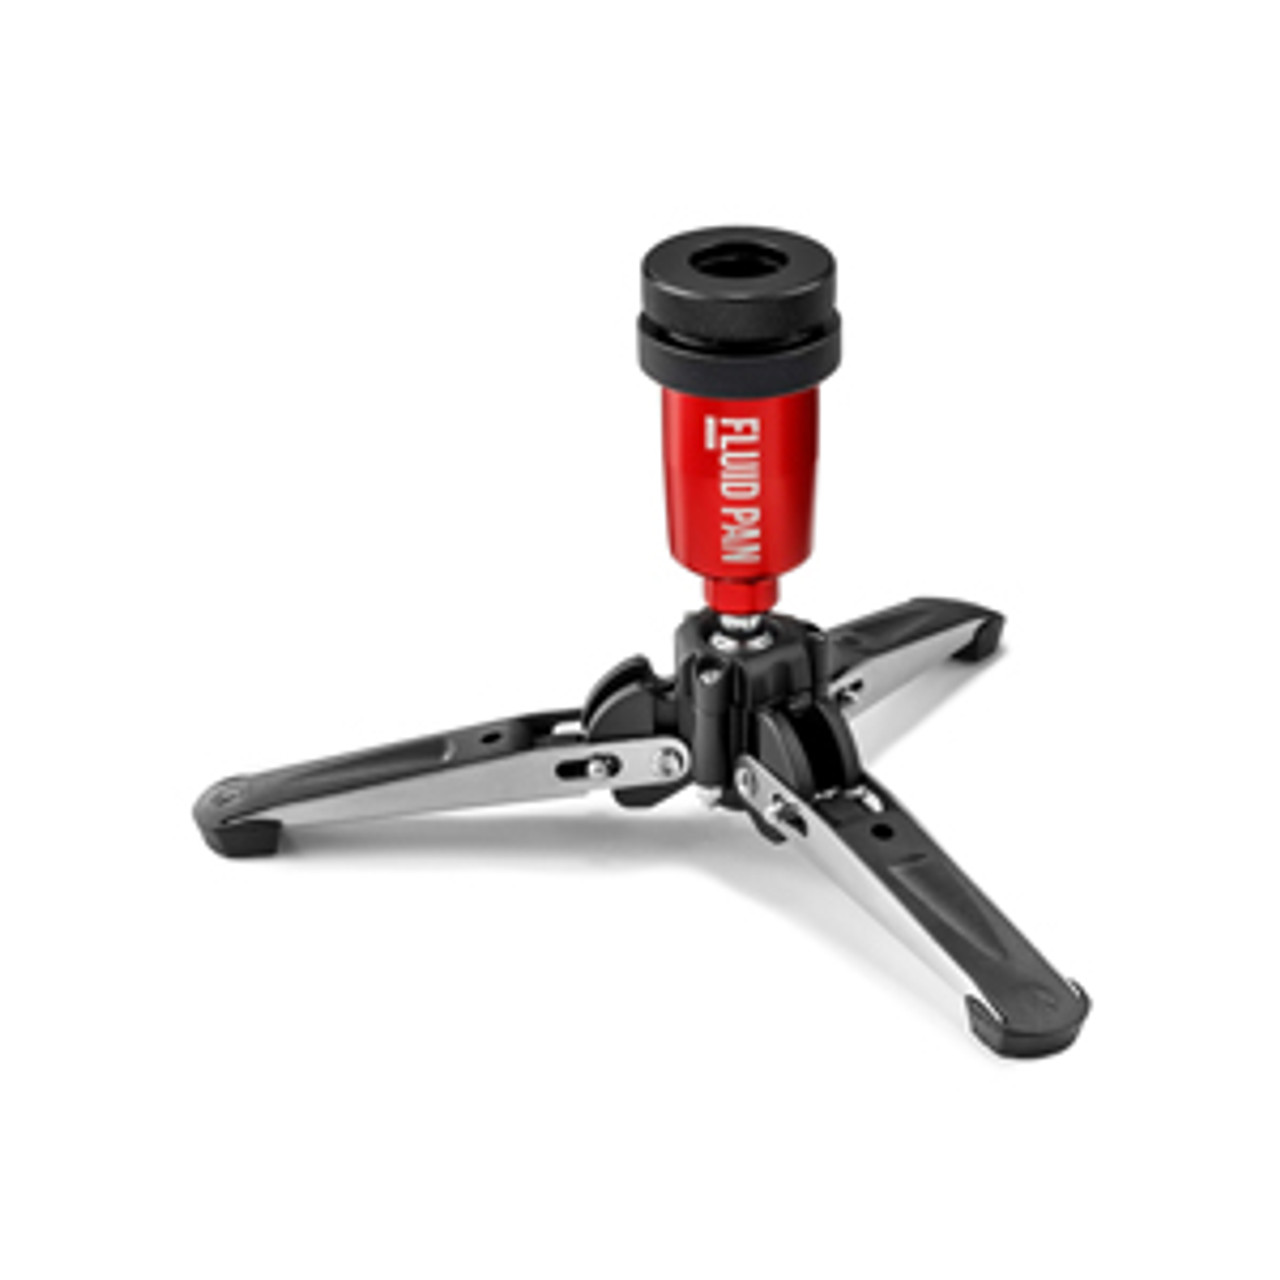 Manfrotto MVA50A Fluid Base with Retractable Feet for Monopods (Ã¸20mm tube)